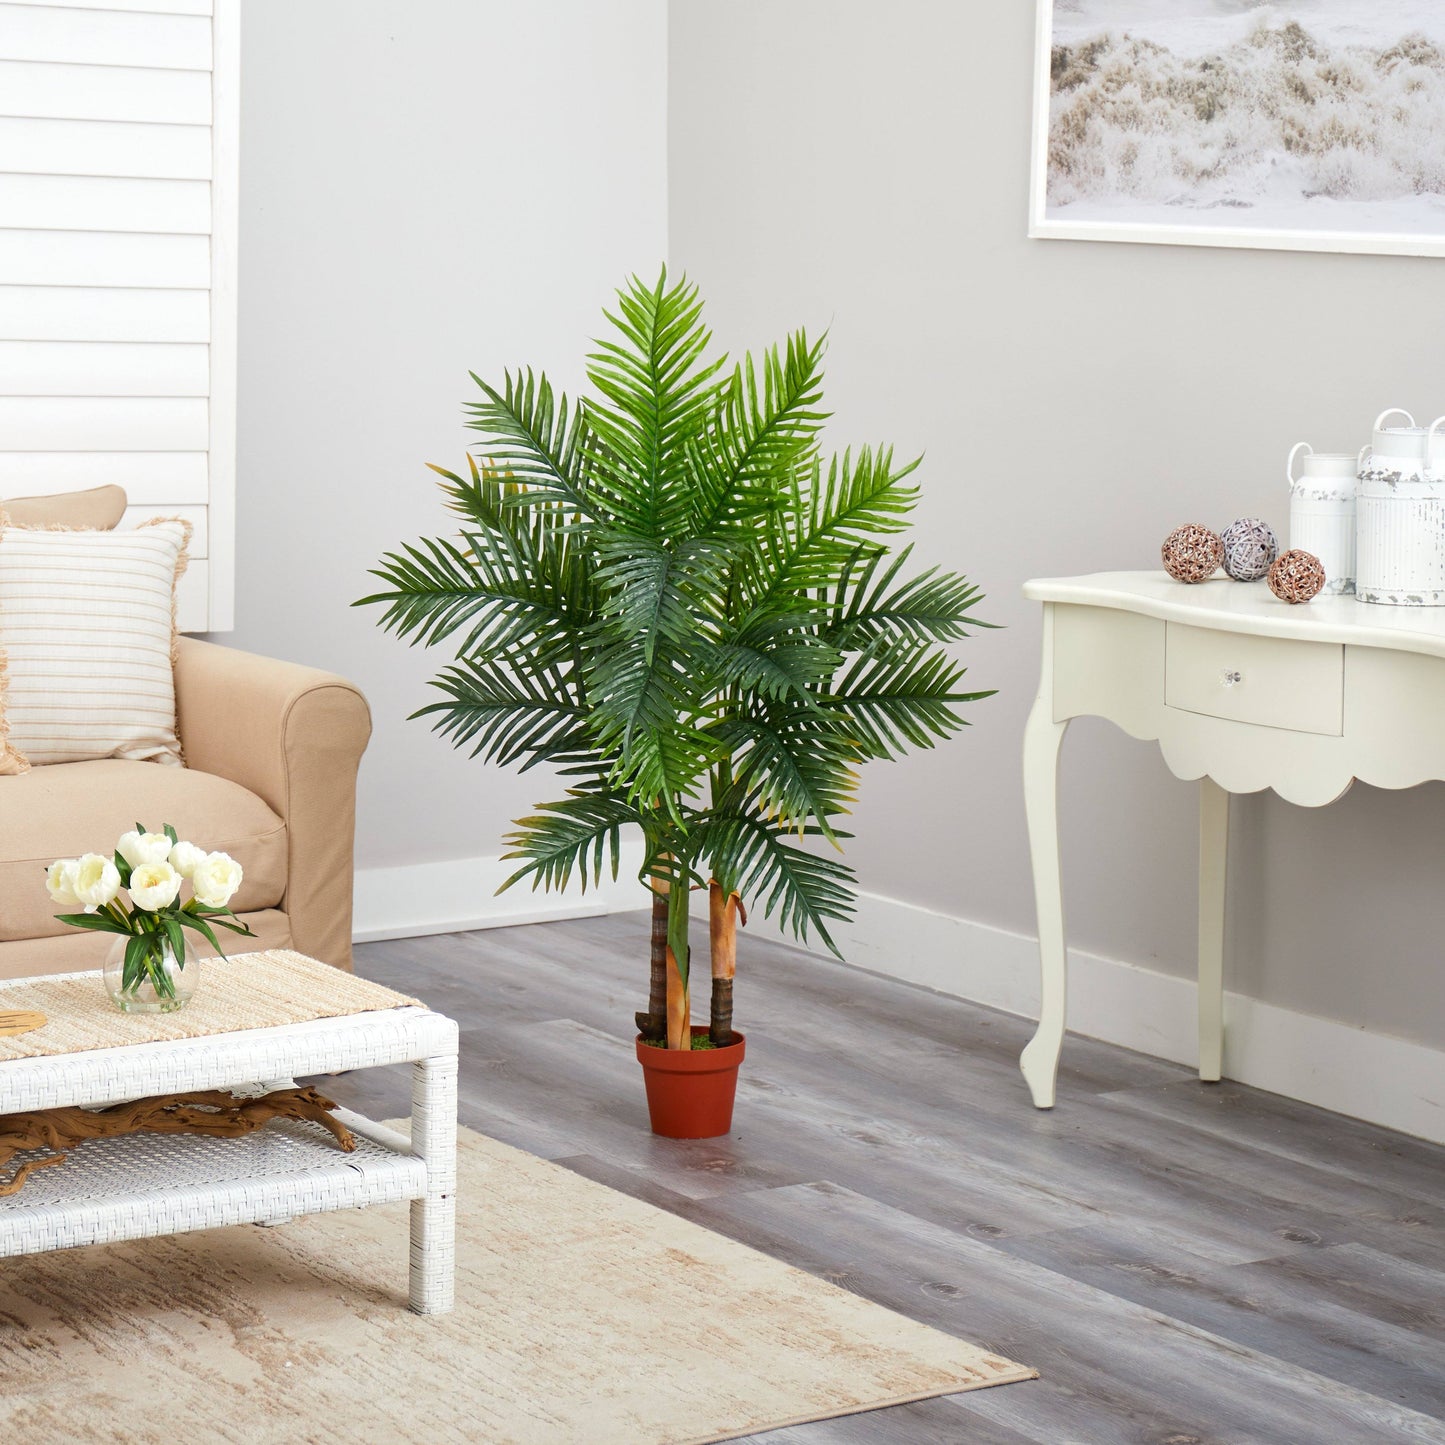 4’ Areca Palm Tree (Real Touch) by Nearly Natural